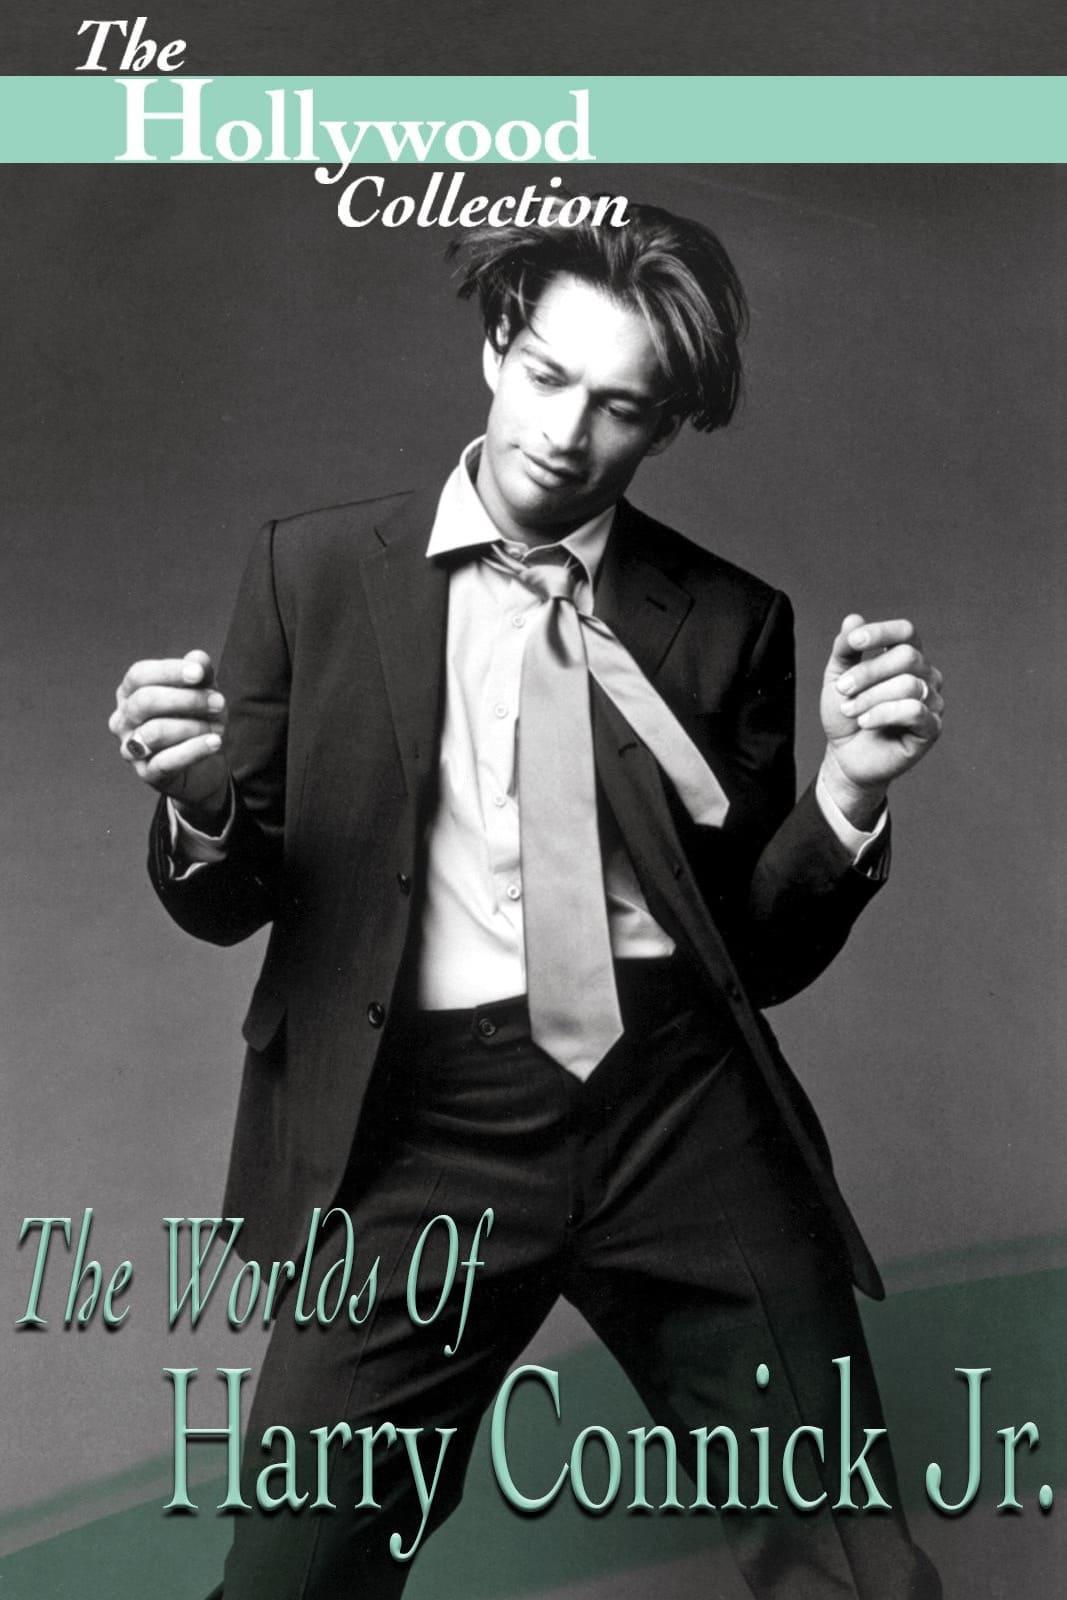 The Worlds of Harry Connick Jr. poster